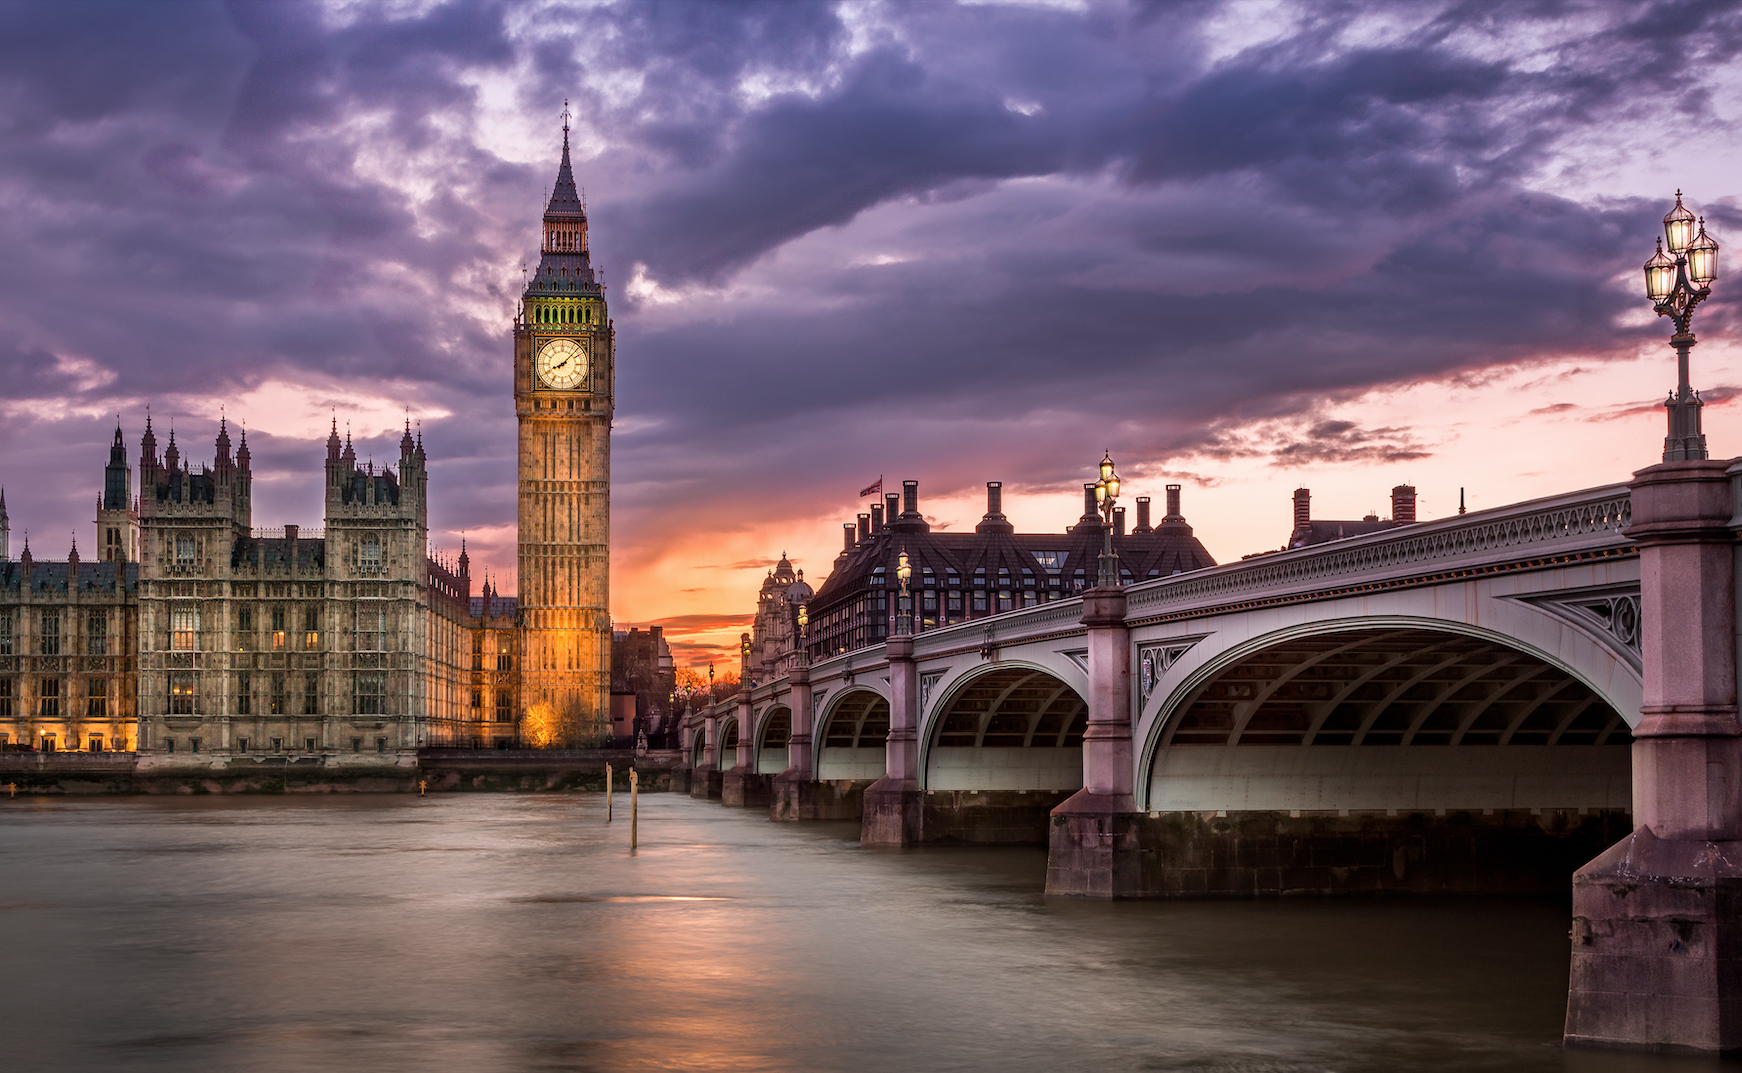 View of London's Big Ben at sunset.